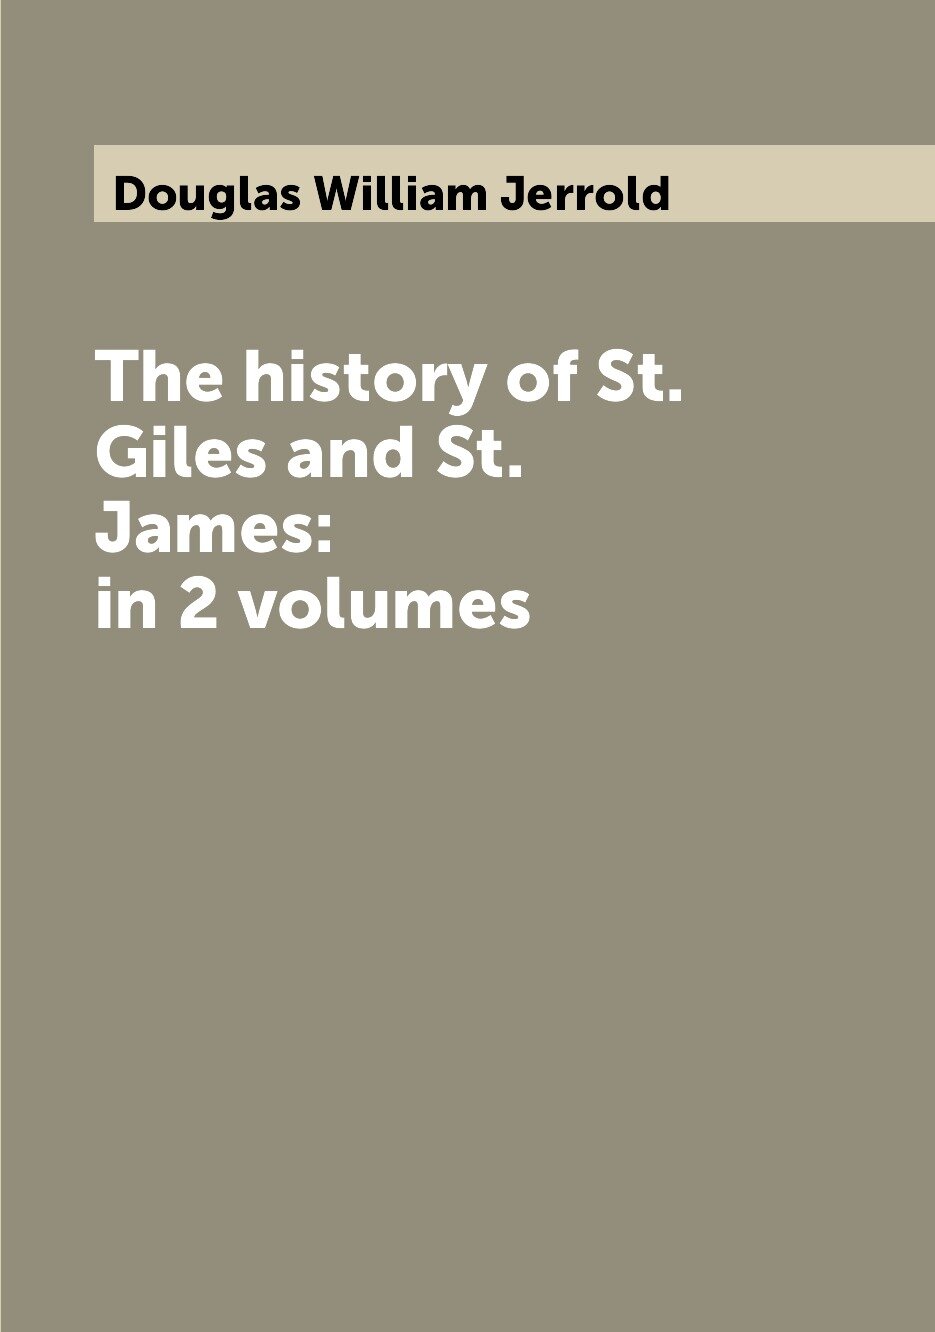 The history of St. Giles and St. James: in 2 volumes